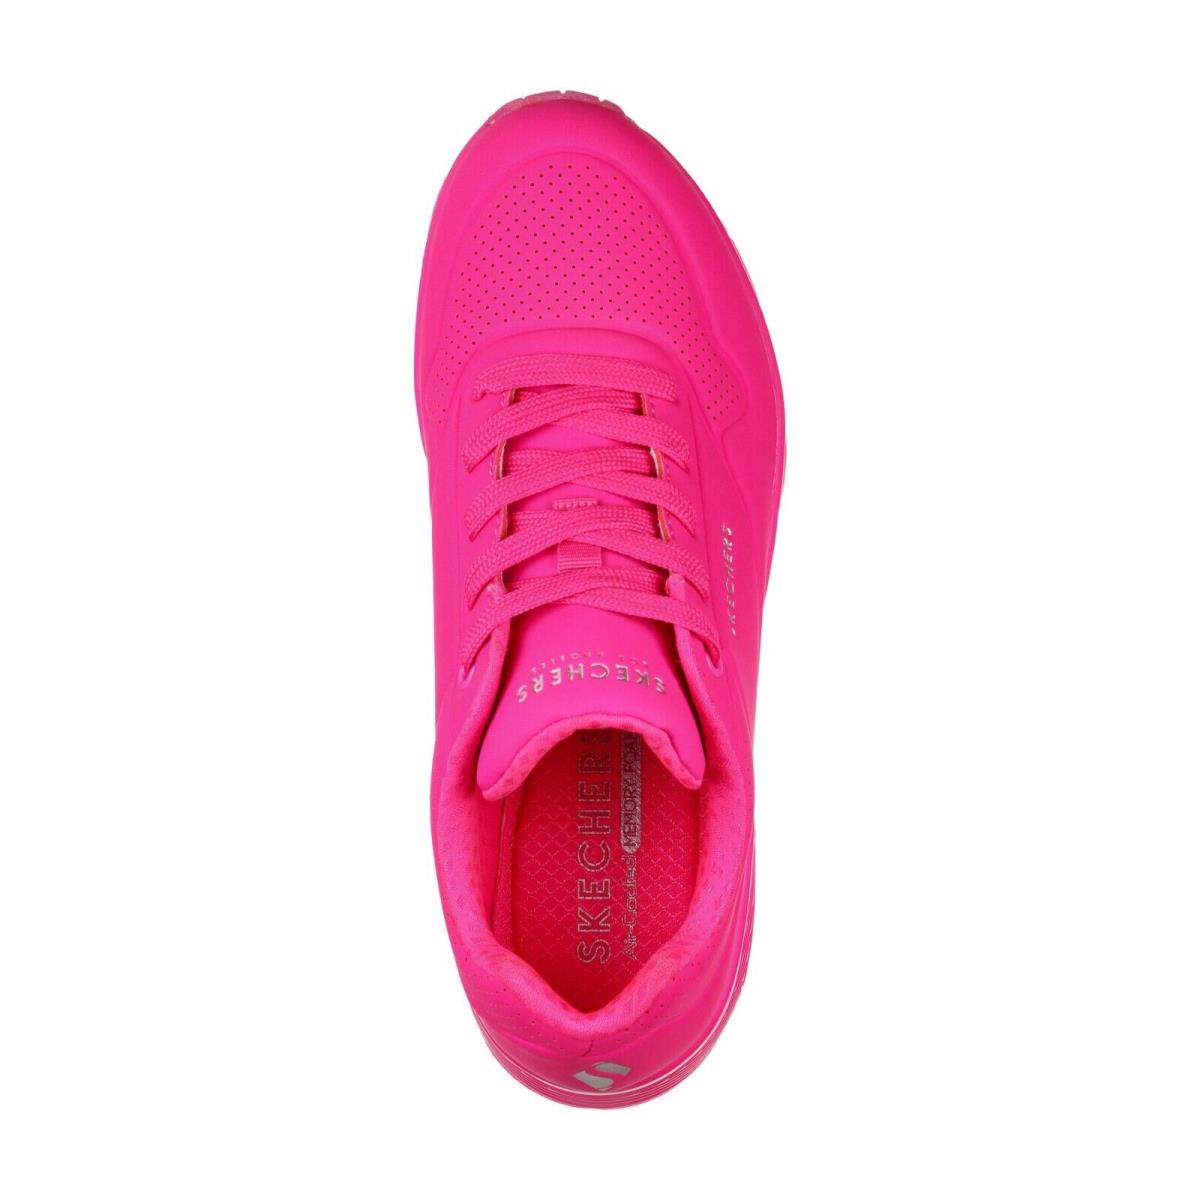 Skechers shoes Uno Night Shades - Hot Pink 7